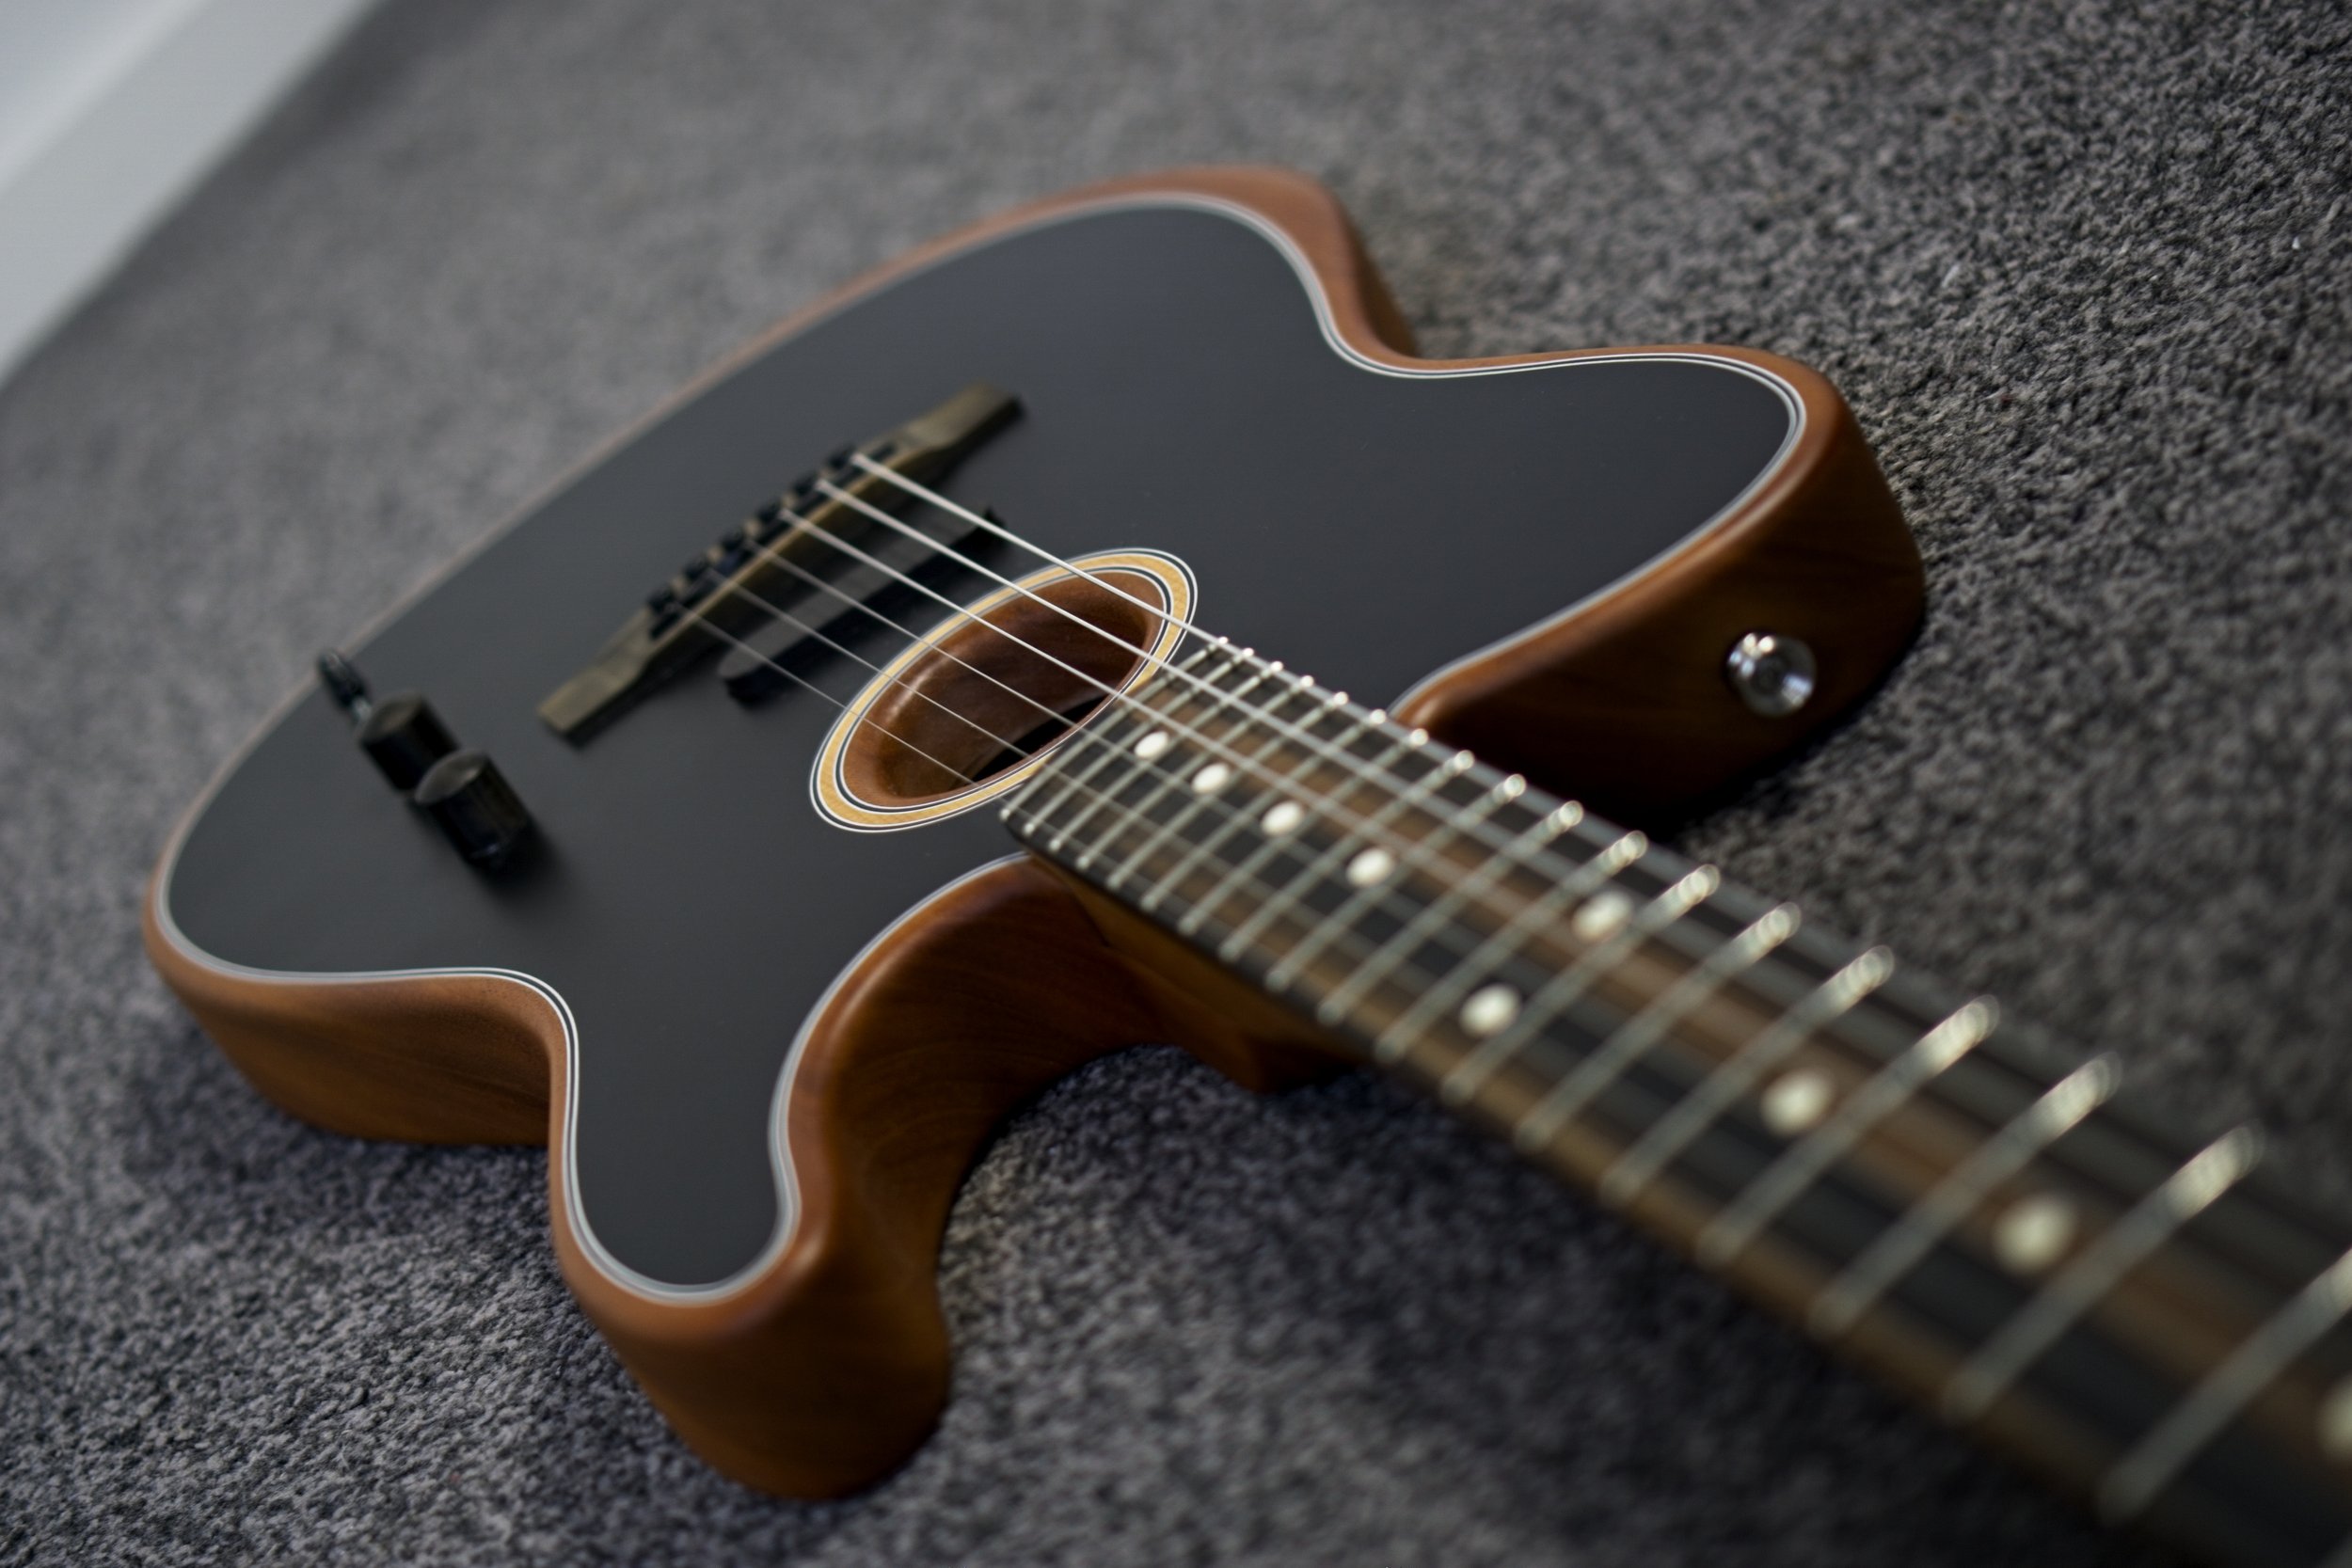 Fender American Acoustasonic Telecaster Review — The Gear Check